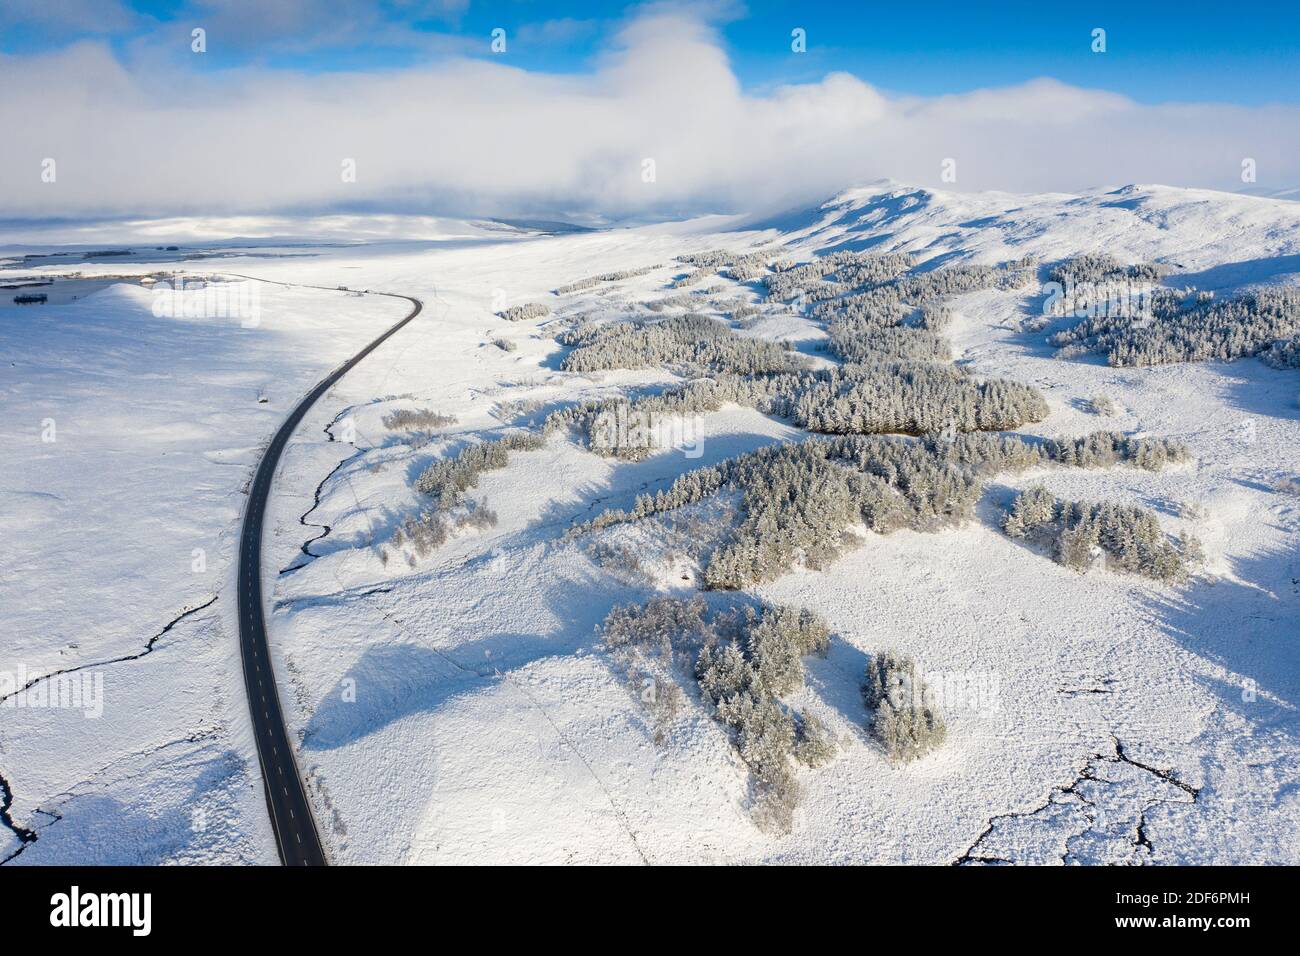 Glen Coe, Scotland, UK. 3 December 2020. A cold front has brought the first snowfall to the Scottish Highlands. Rannoch Moor and Glen Coe are covered in several inches of snow. Bright sunshine throughout the day created beautiful winter landscapes.  Pictured; Aerial view of A82 passing over snow covered Rannoch Moor.  Iain Masterton/Alamy Live News Stock Photo